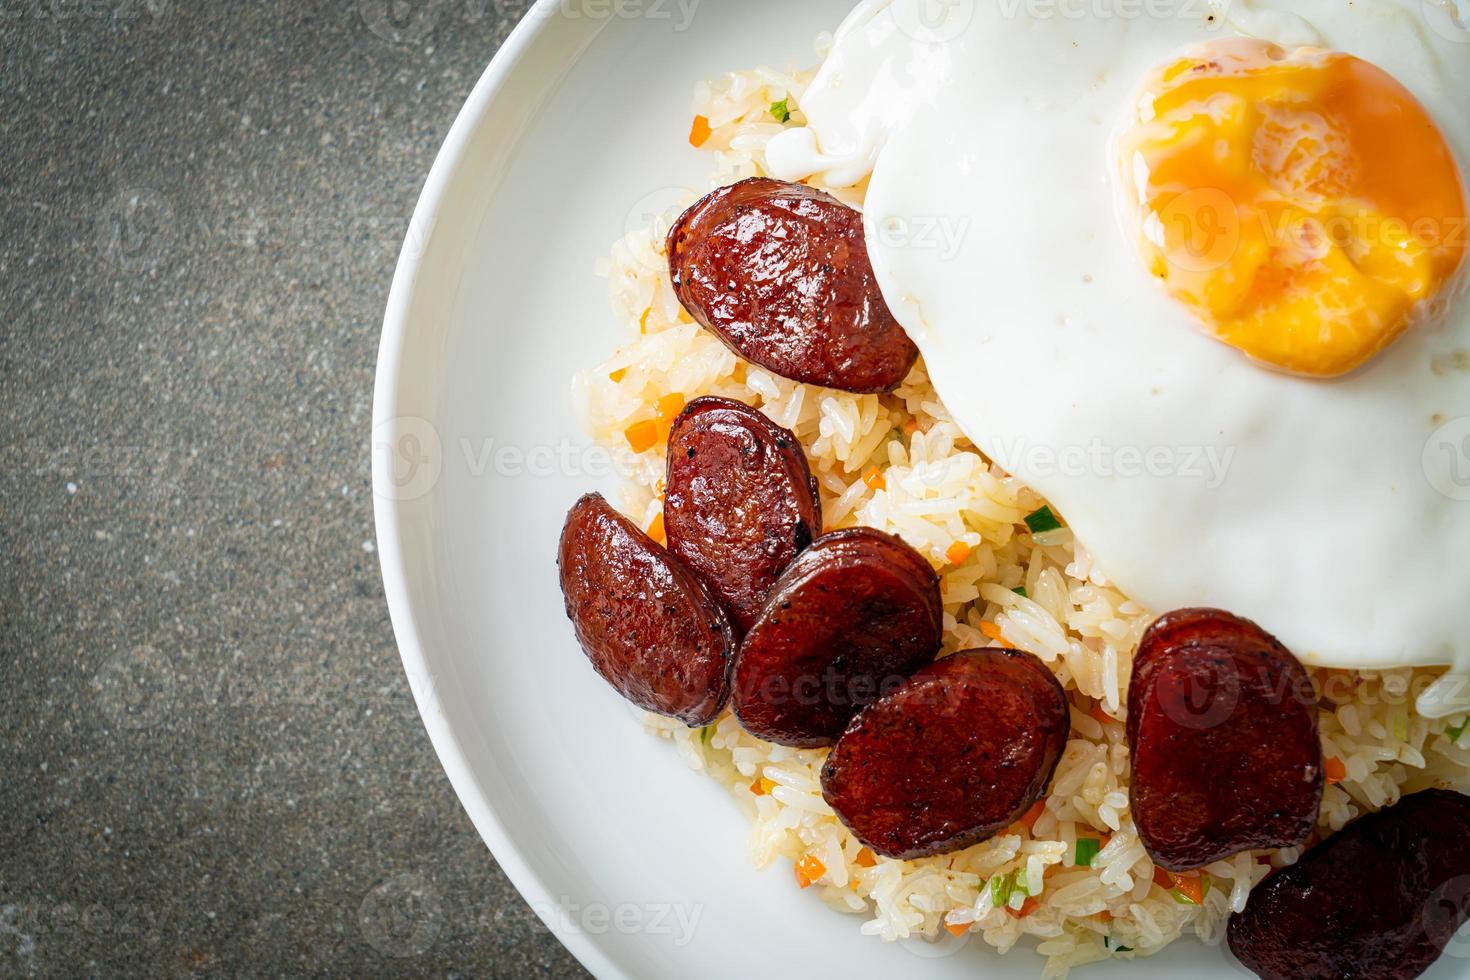 Fried rice with fried egg and Chinese sausage - Homemade food in Asian style photo